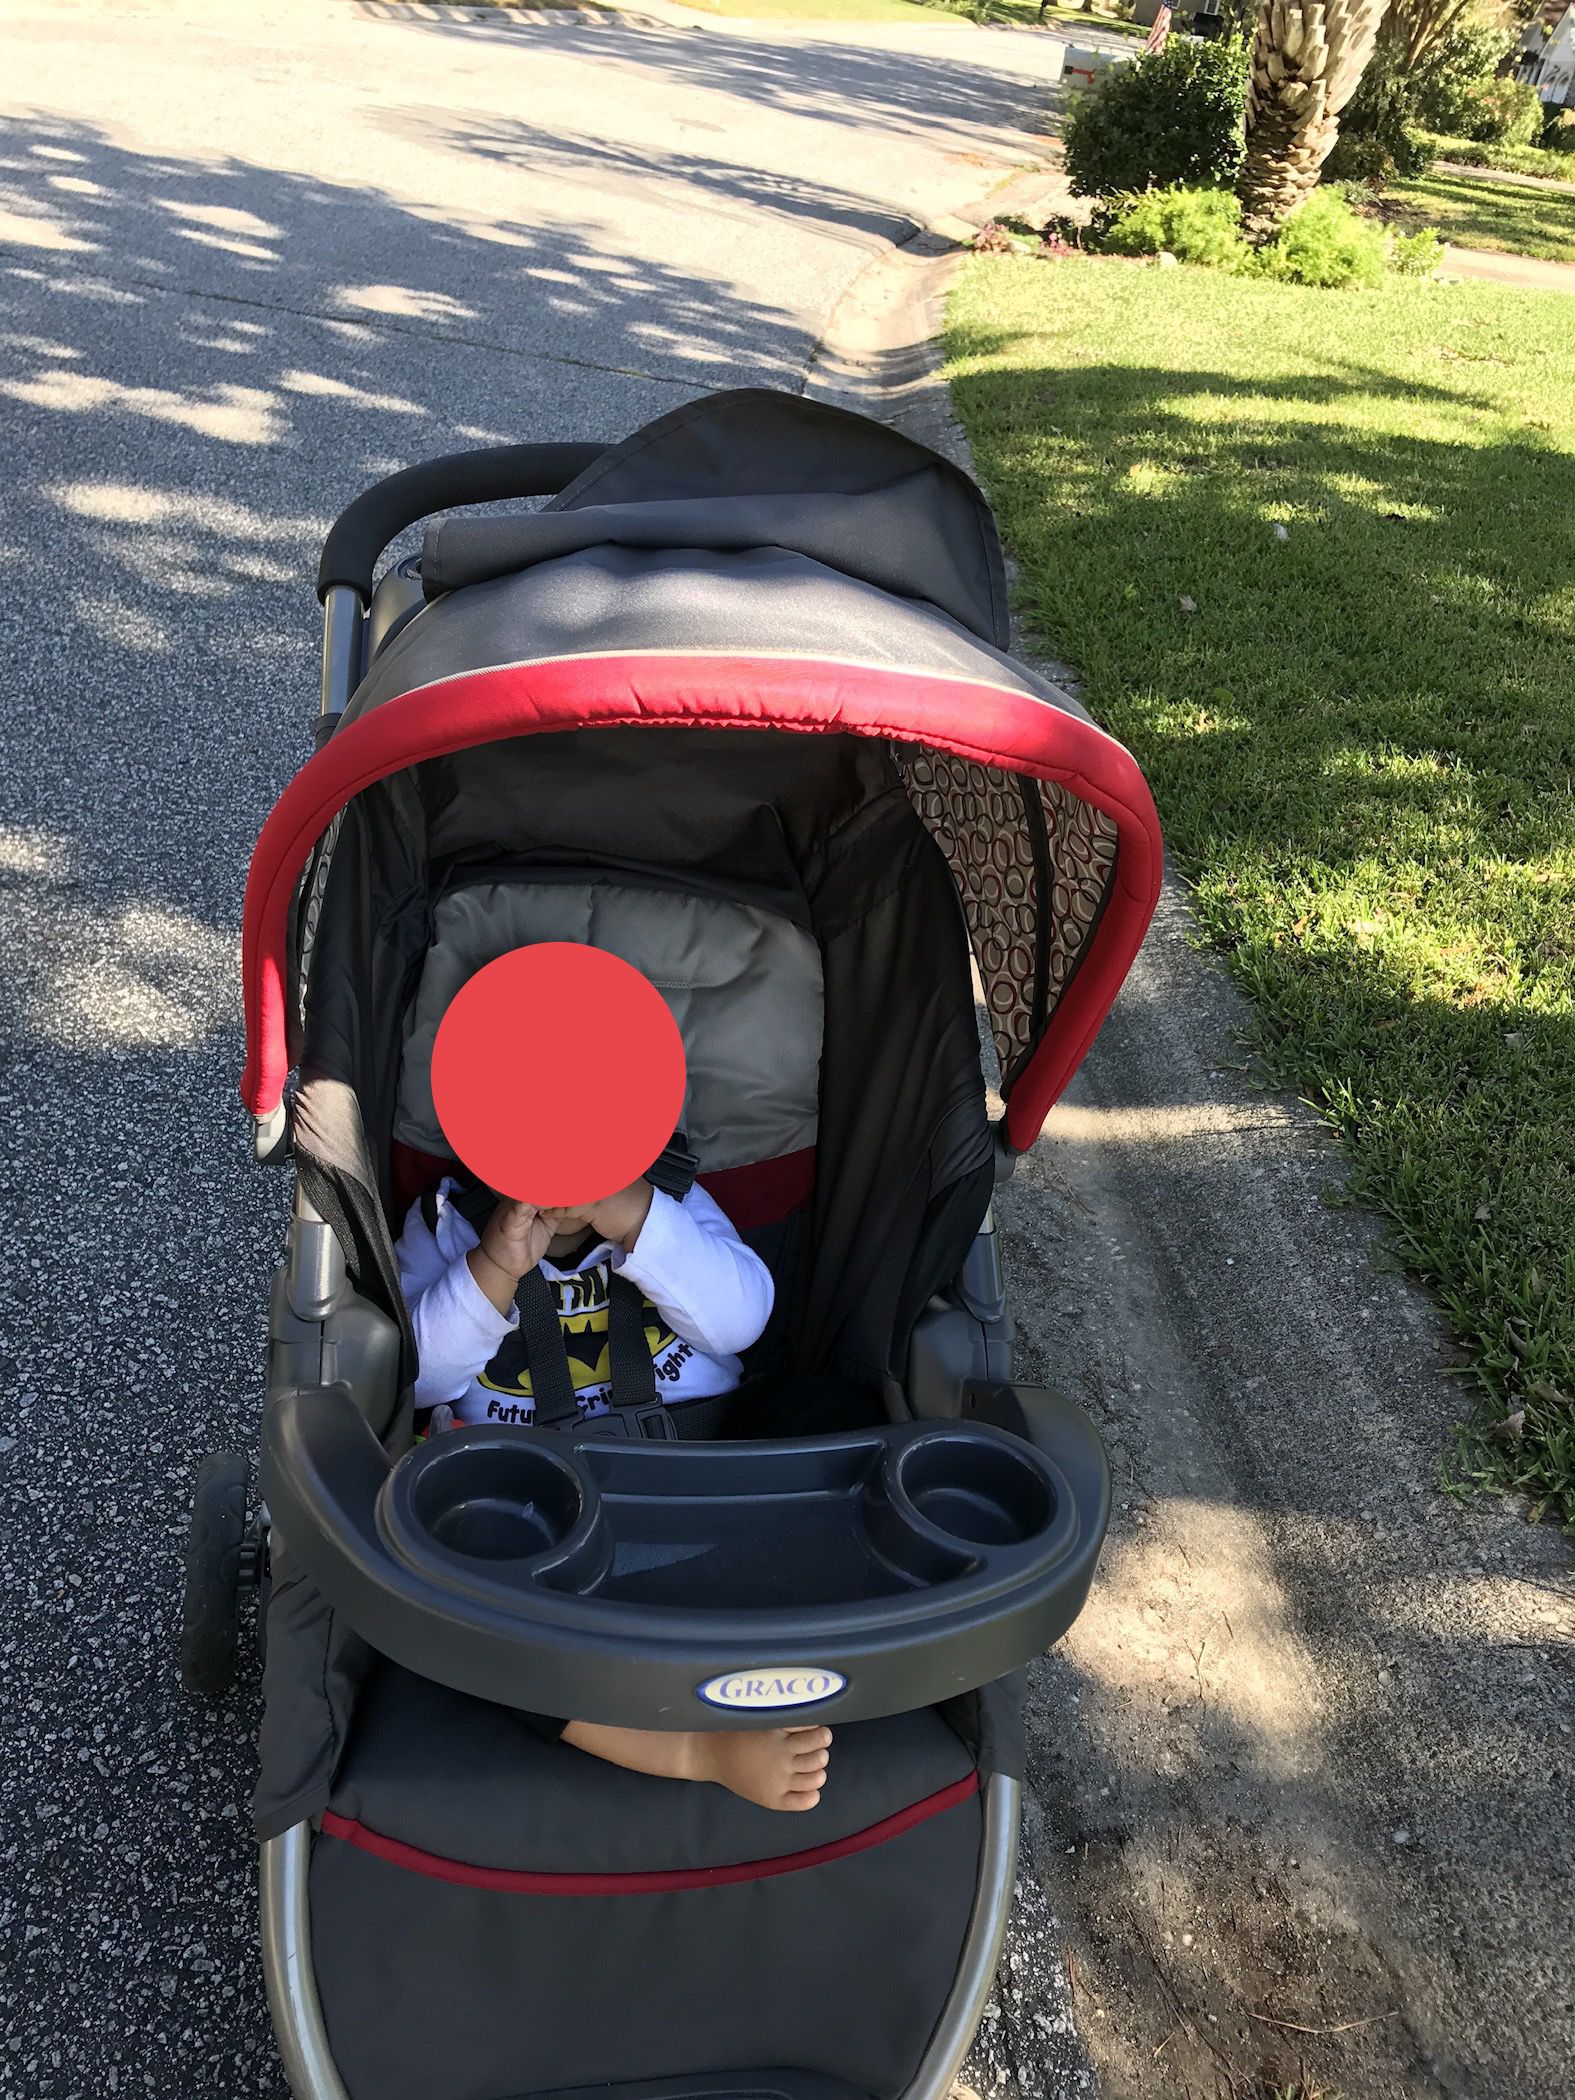 Graco FastAction Fold Click Connect Stroller